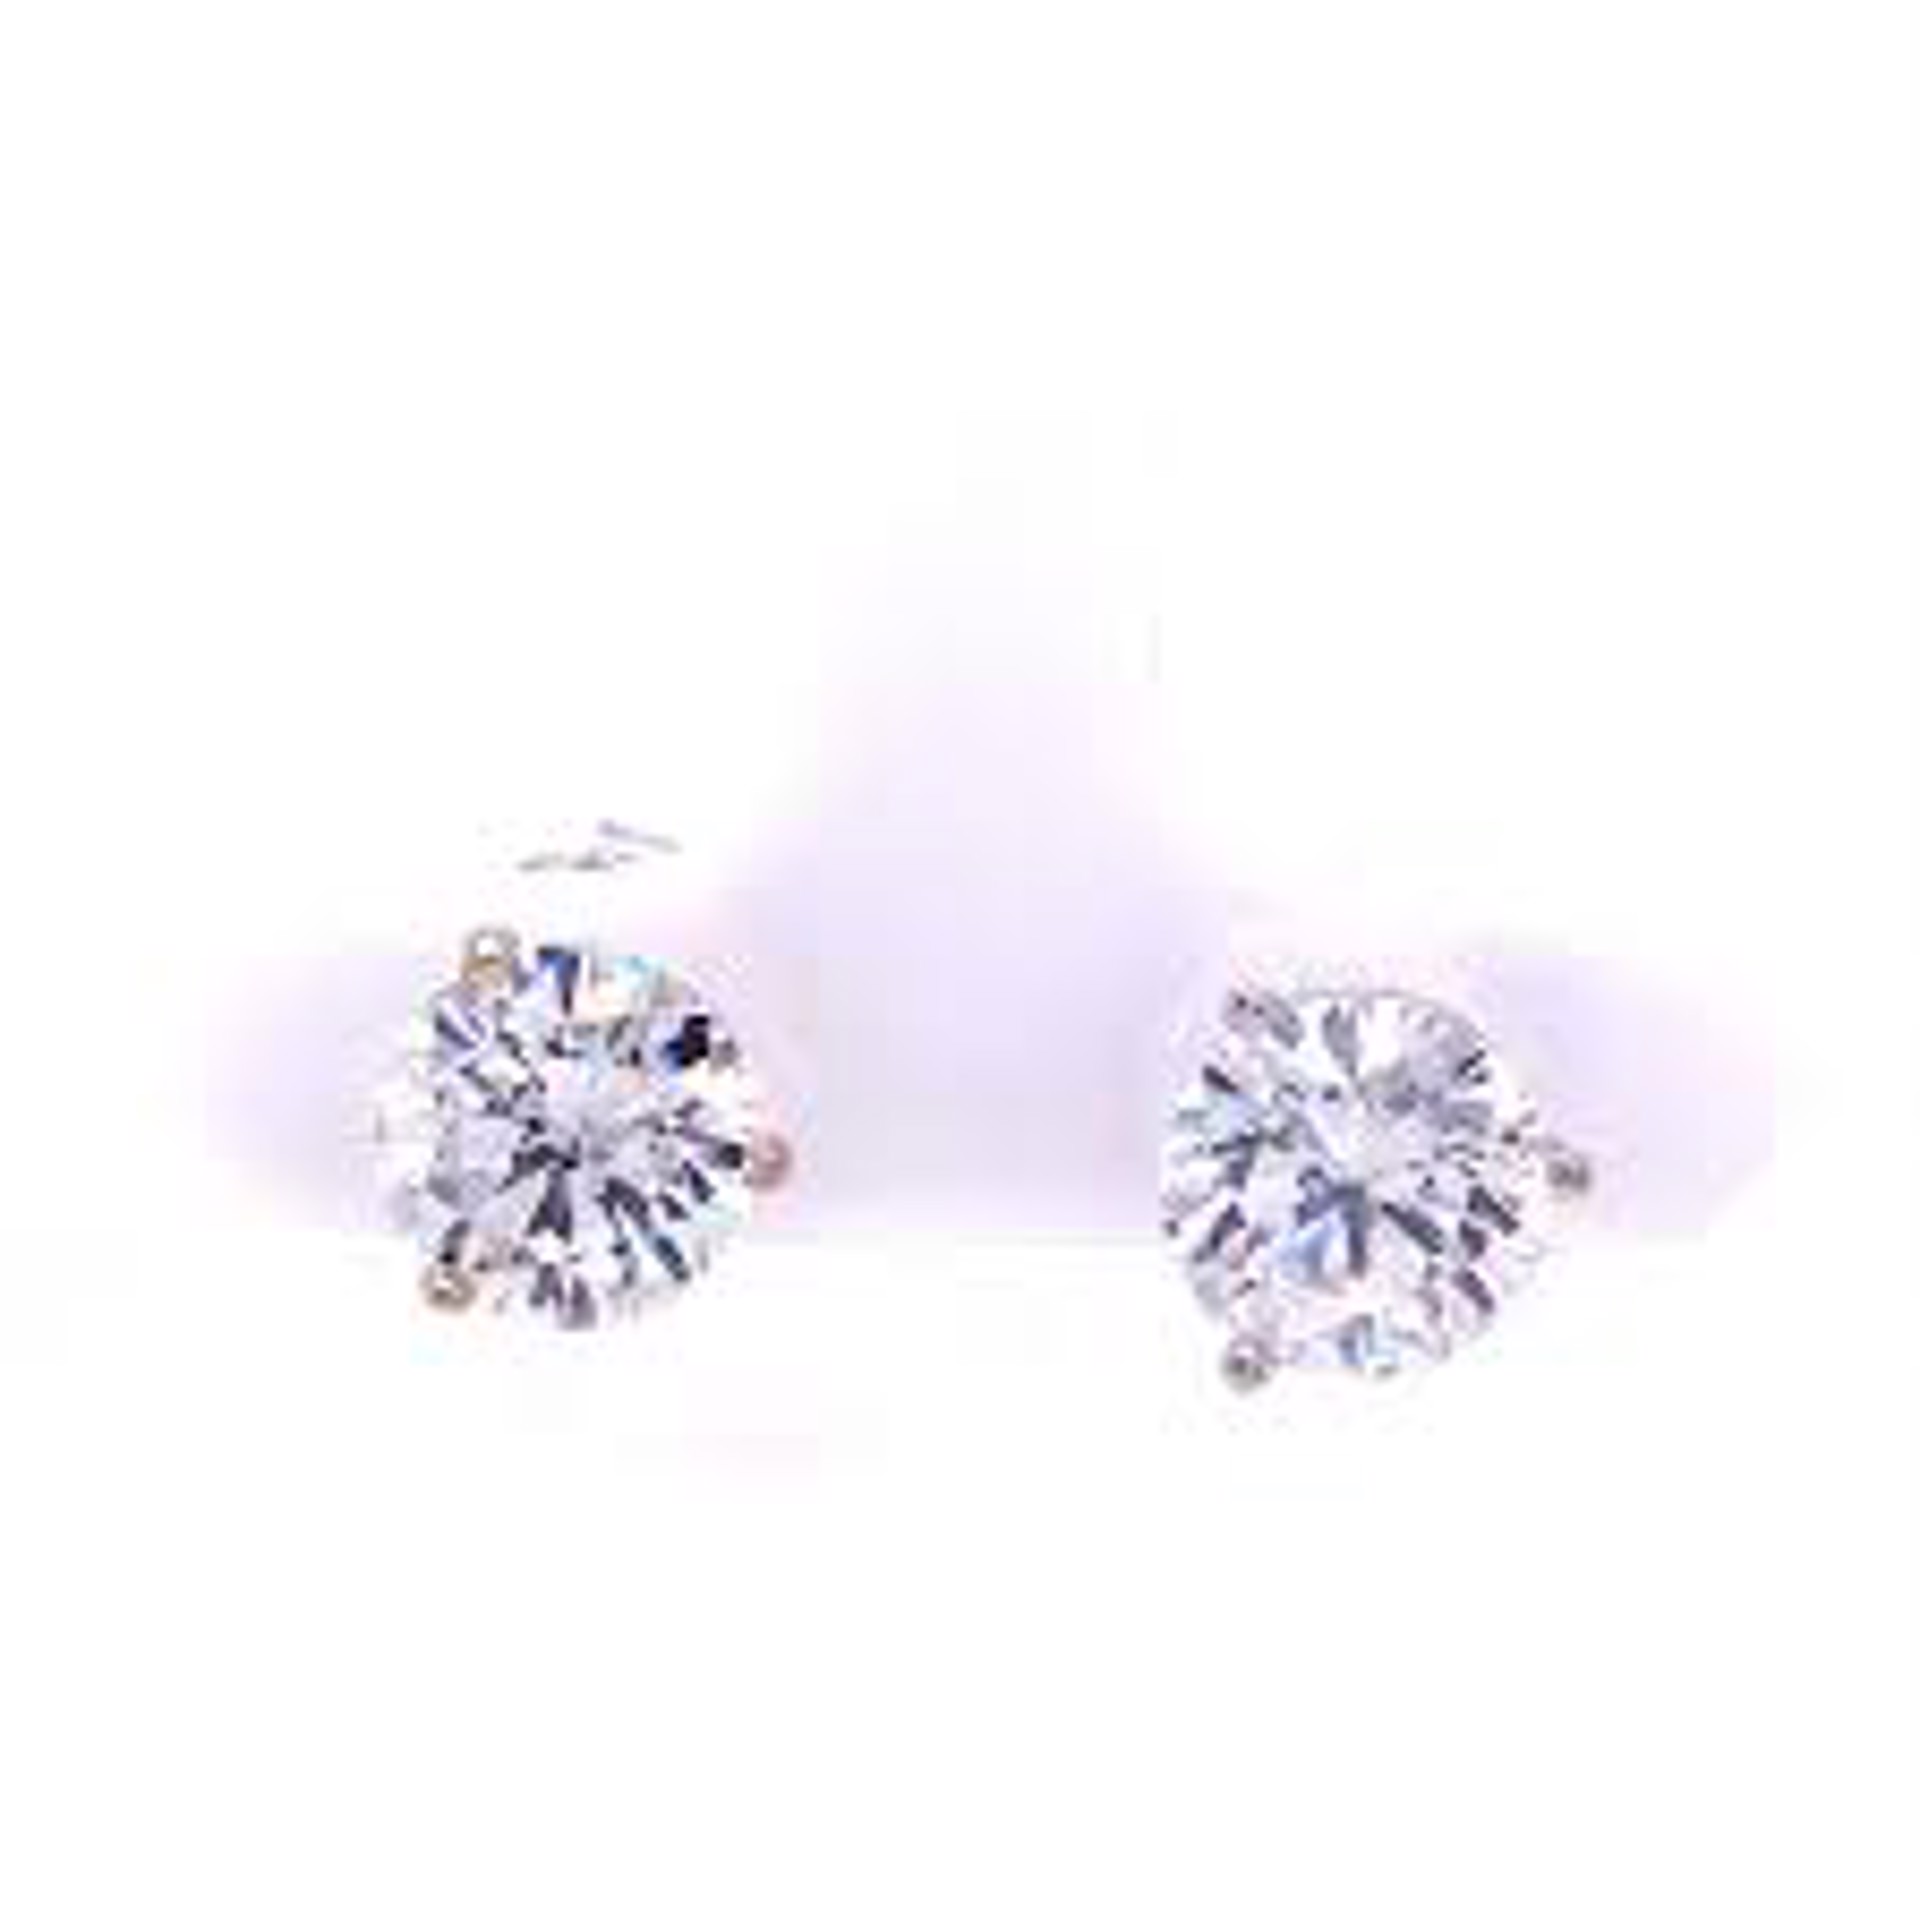 CZ Diamond Studs in 18k white gold by Llyn Strong